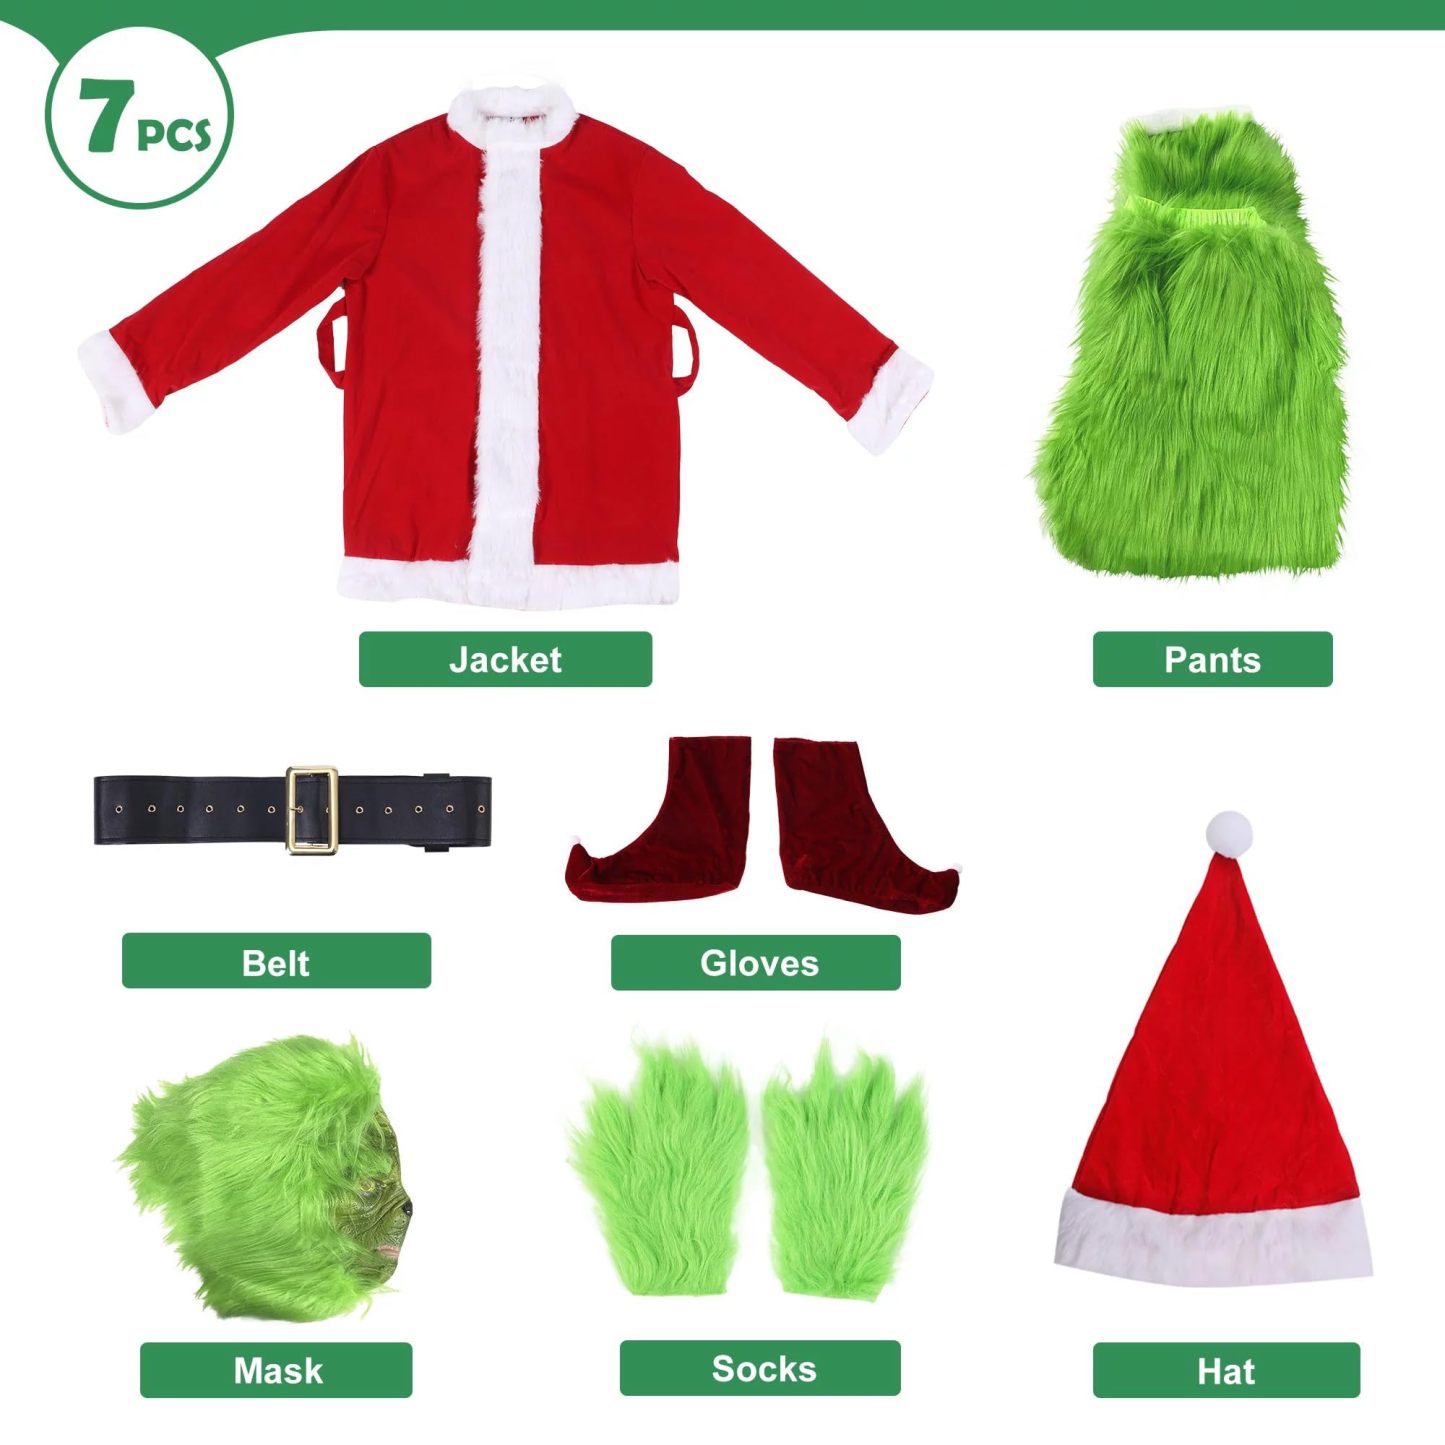 The Grinch 7-Piece Christmas Cosplay Costume Set